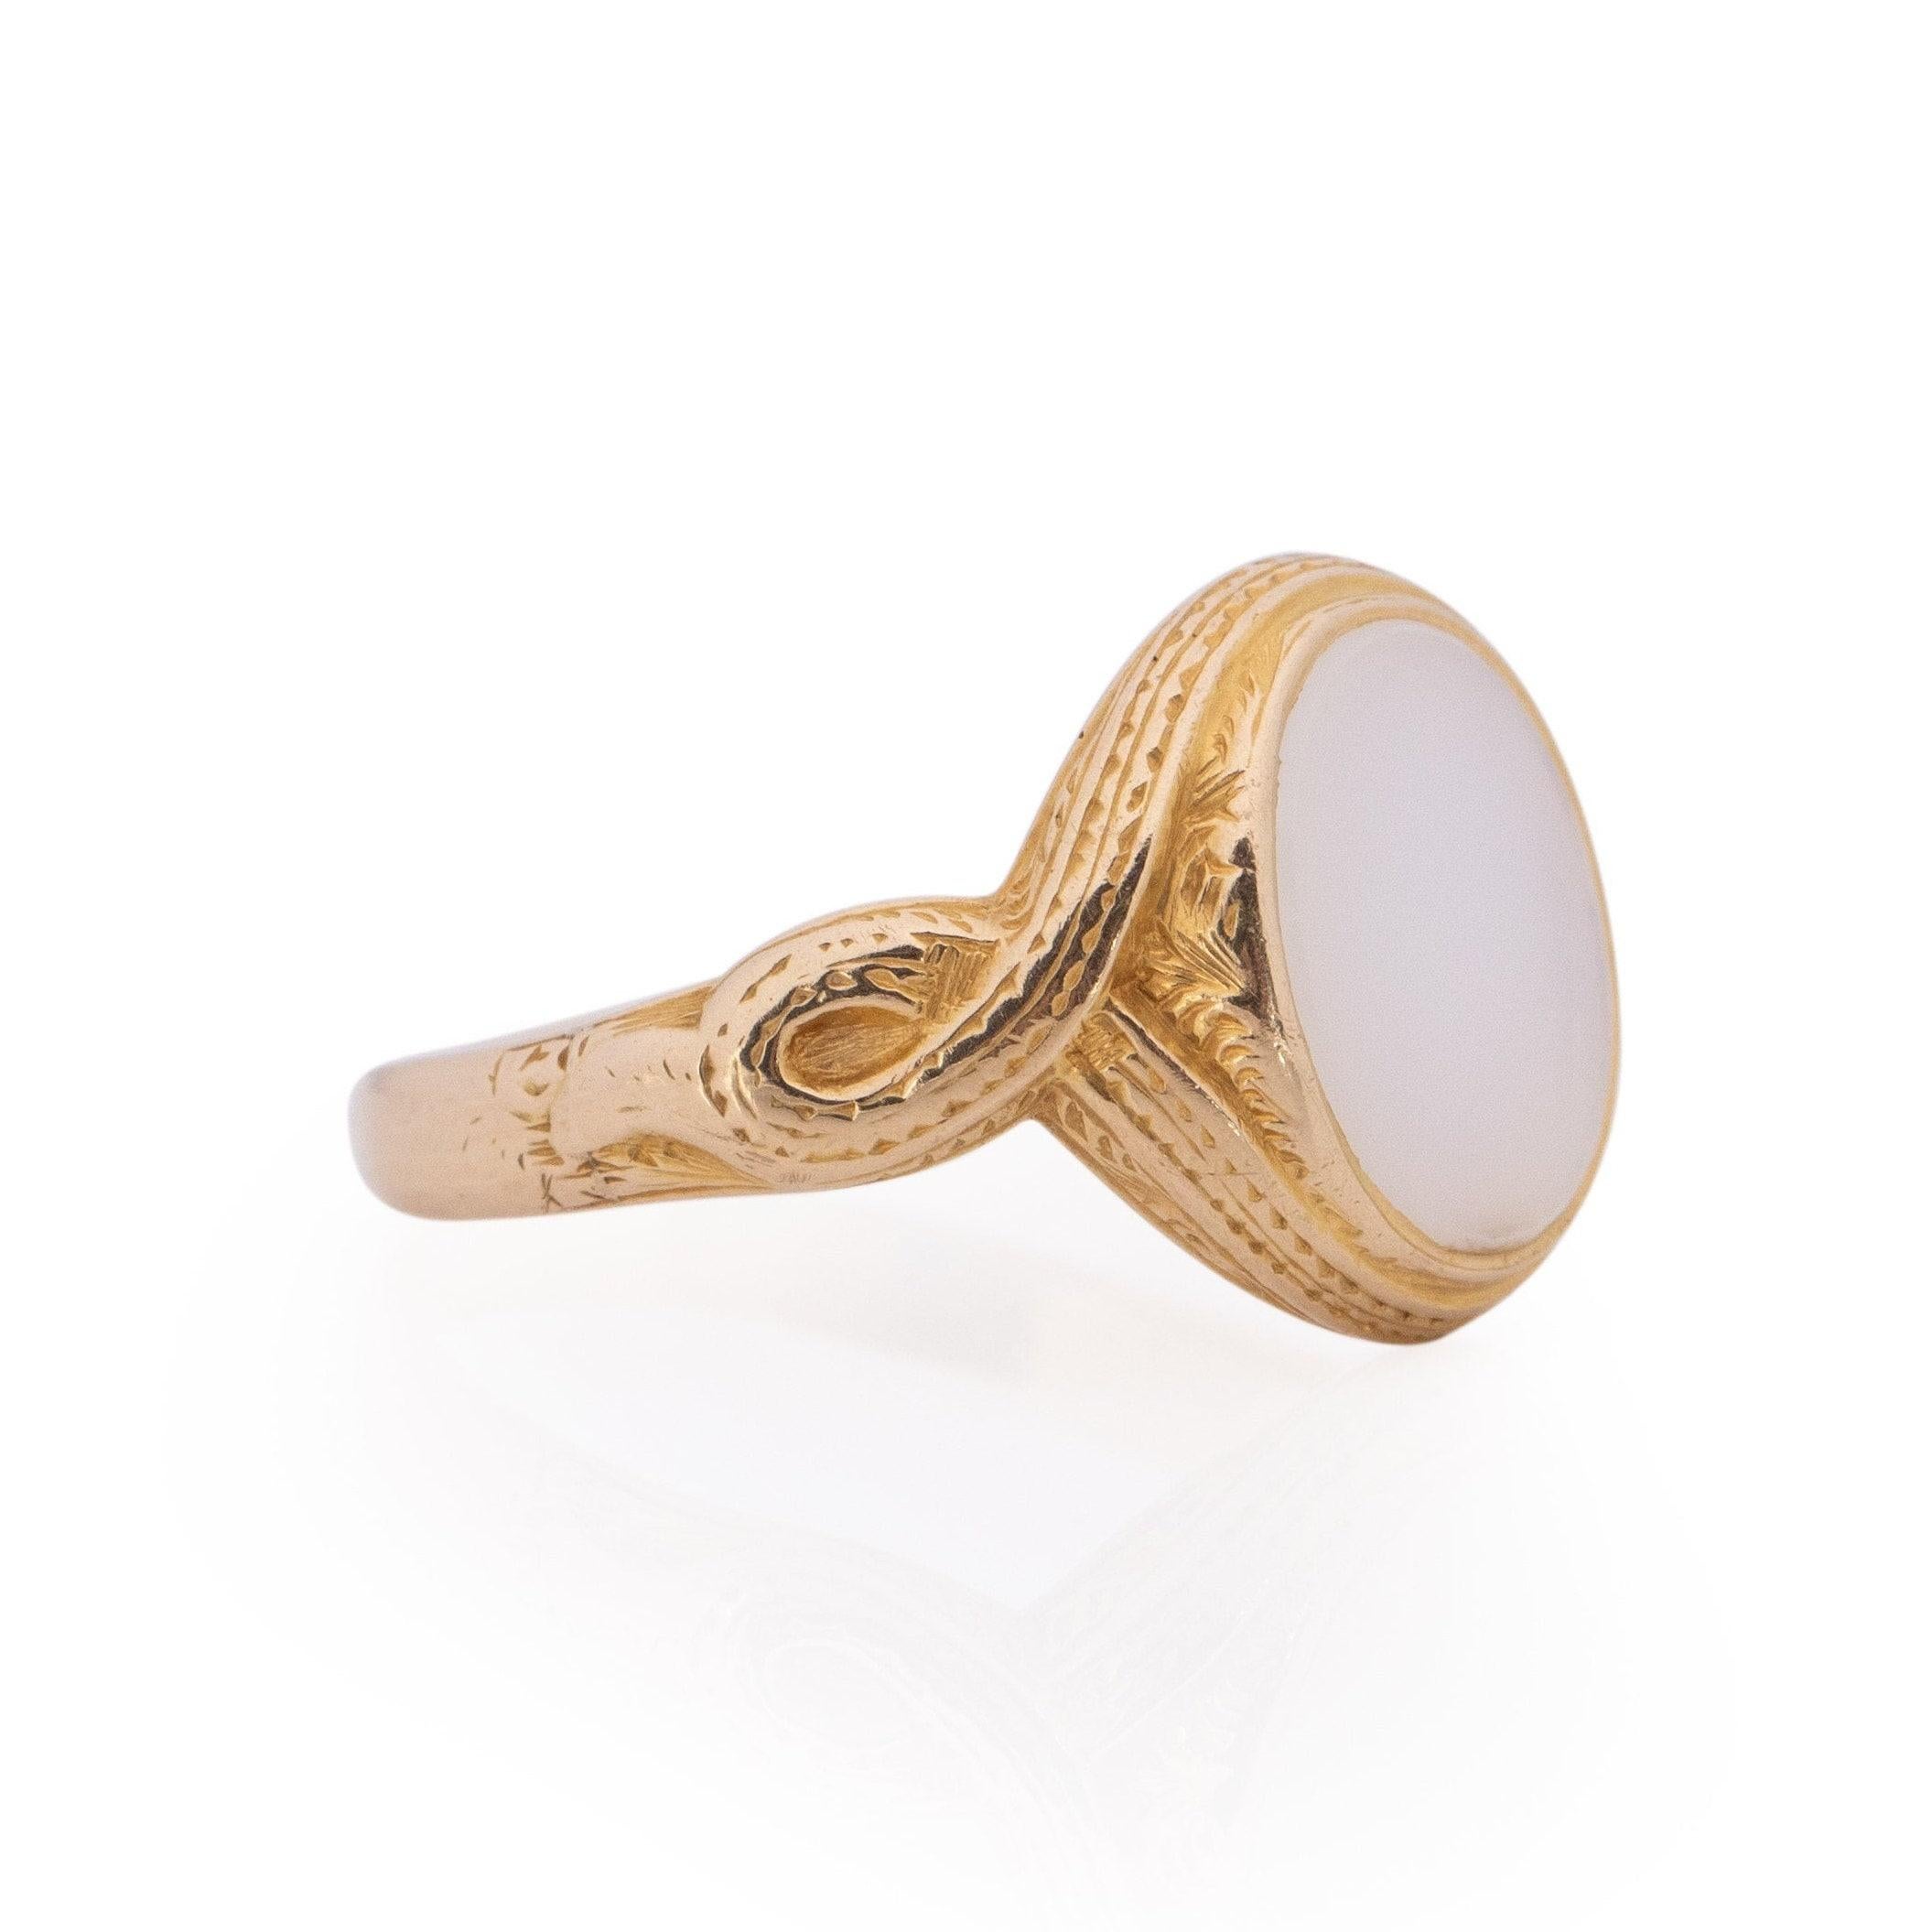 Introducing a one-of-a-kind vintage gem, this ring showcases exquisite craftsmanship in 15K yellow gold, featuring a milky-colored opaque oval gem at its center reminiscent of a moonstone. The sleek finish offers a subtle profile, allowing the